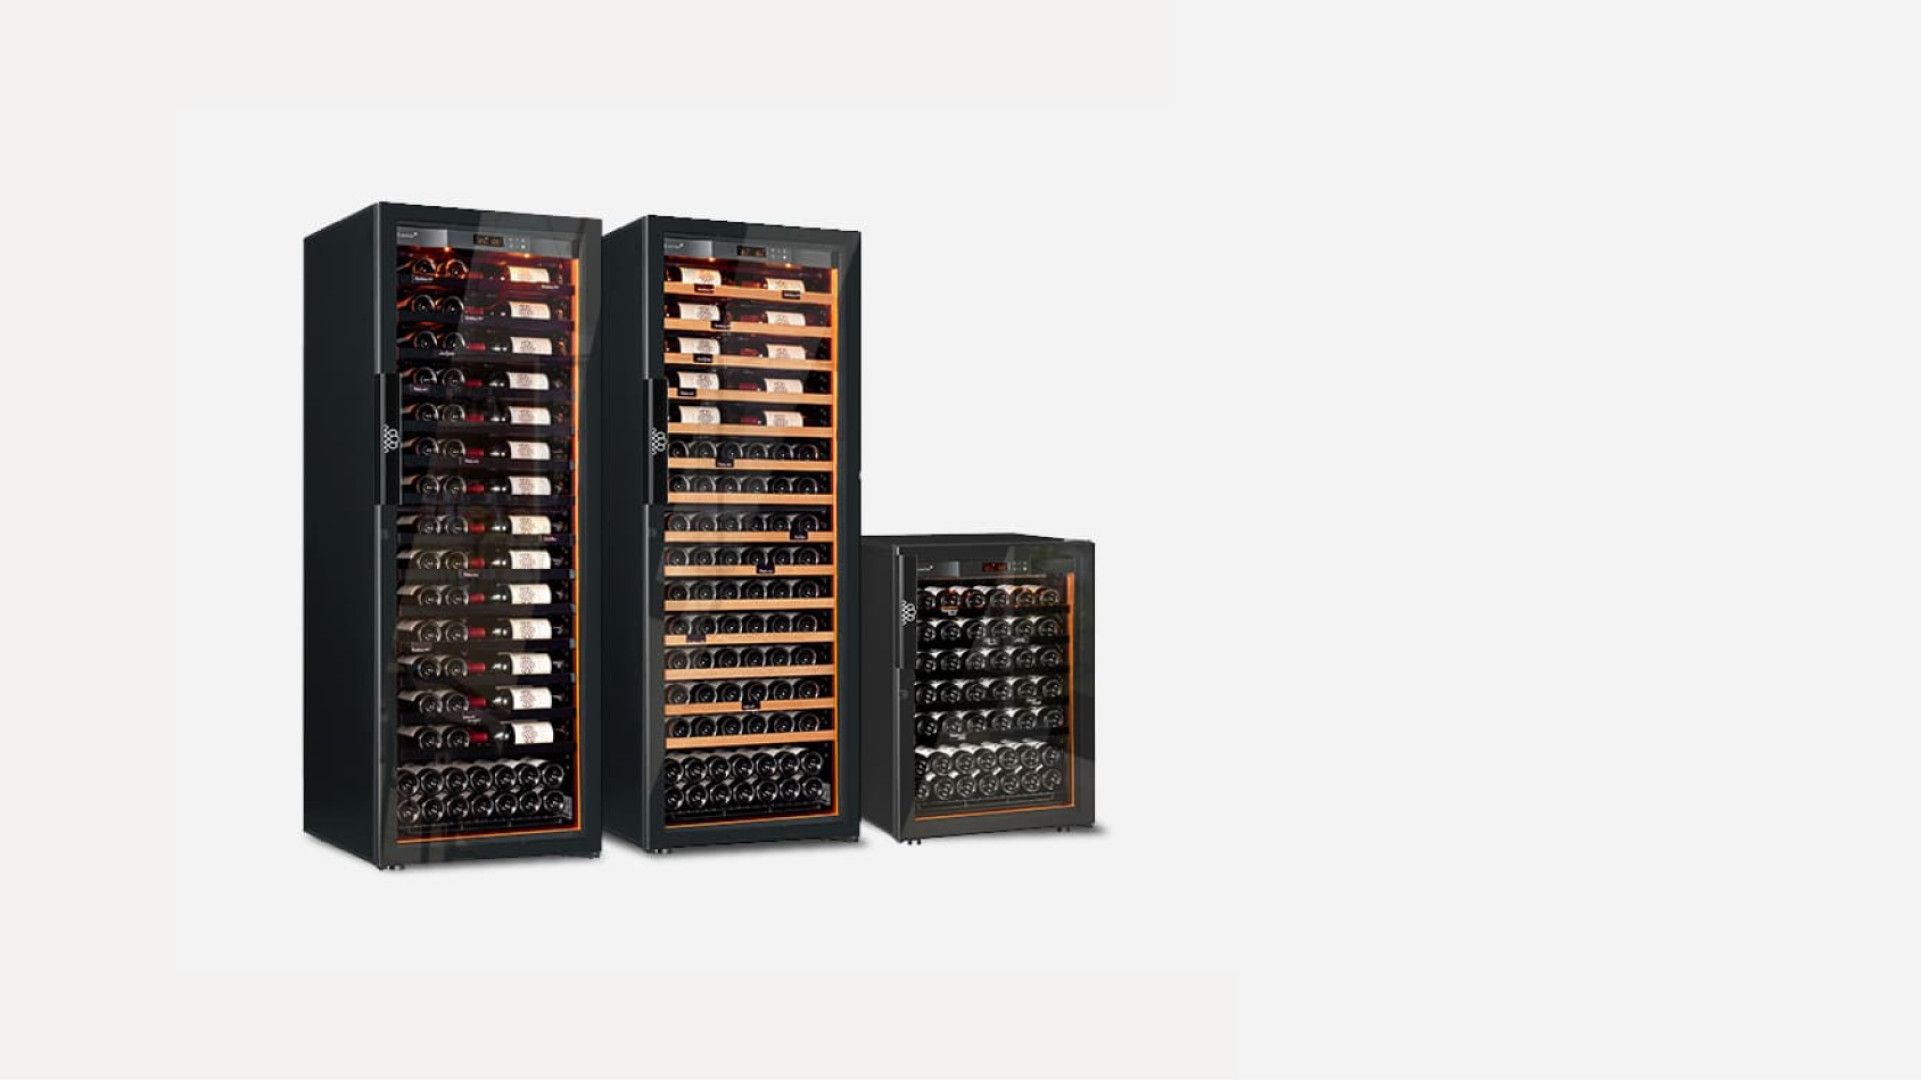 When purchasing this aging wine cabinet, you have the choice between 2 sizes: small model and large model, several storage configurations, 2 shelf colors